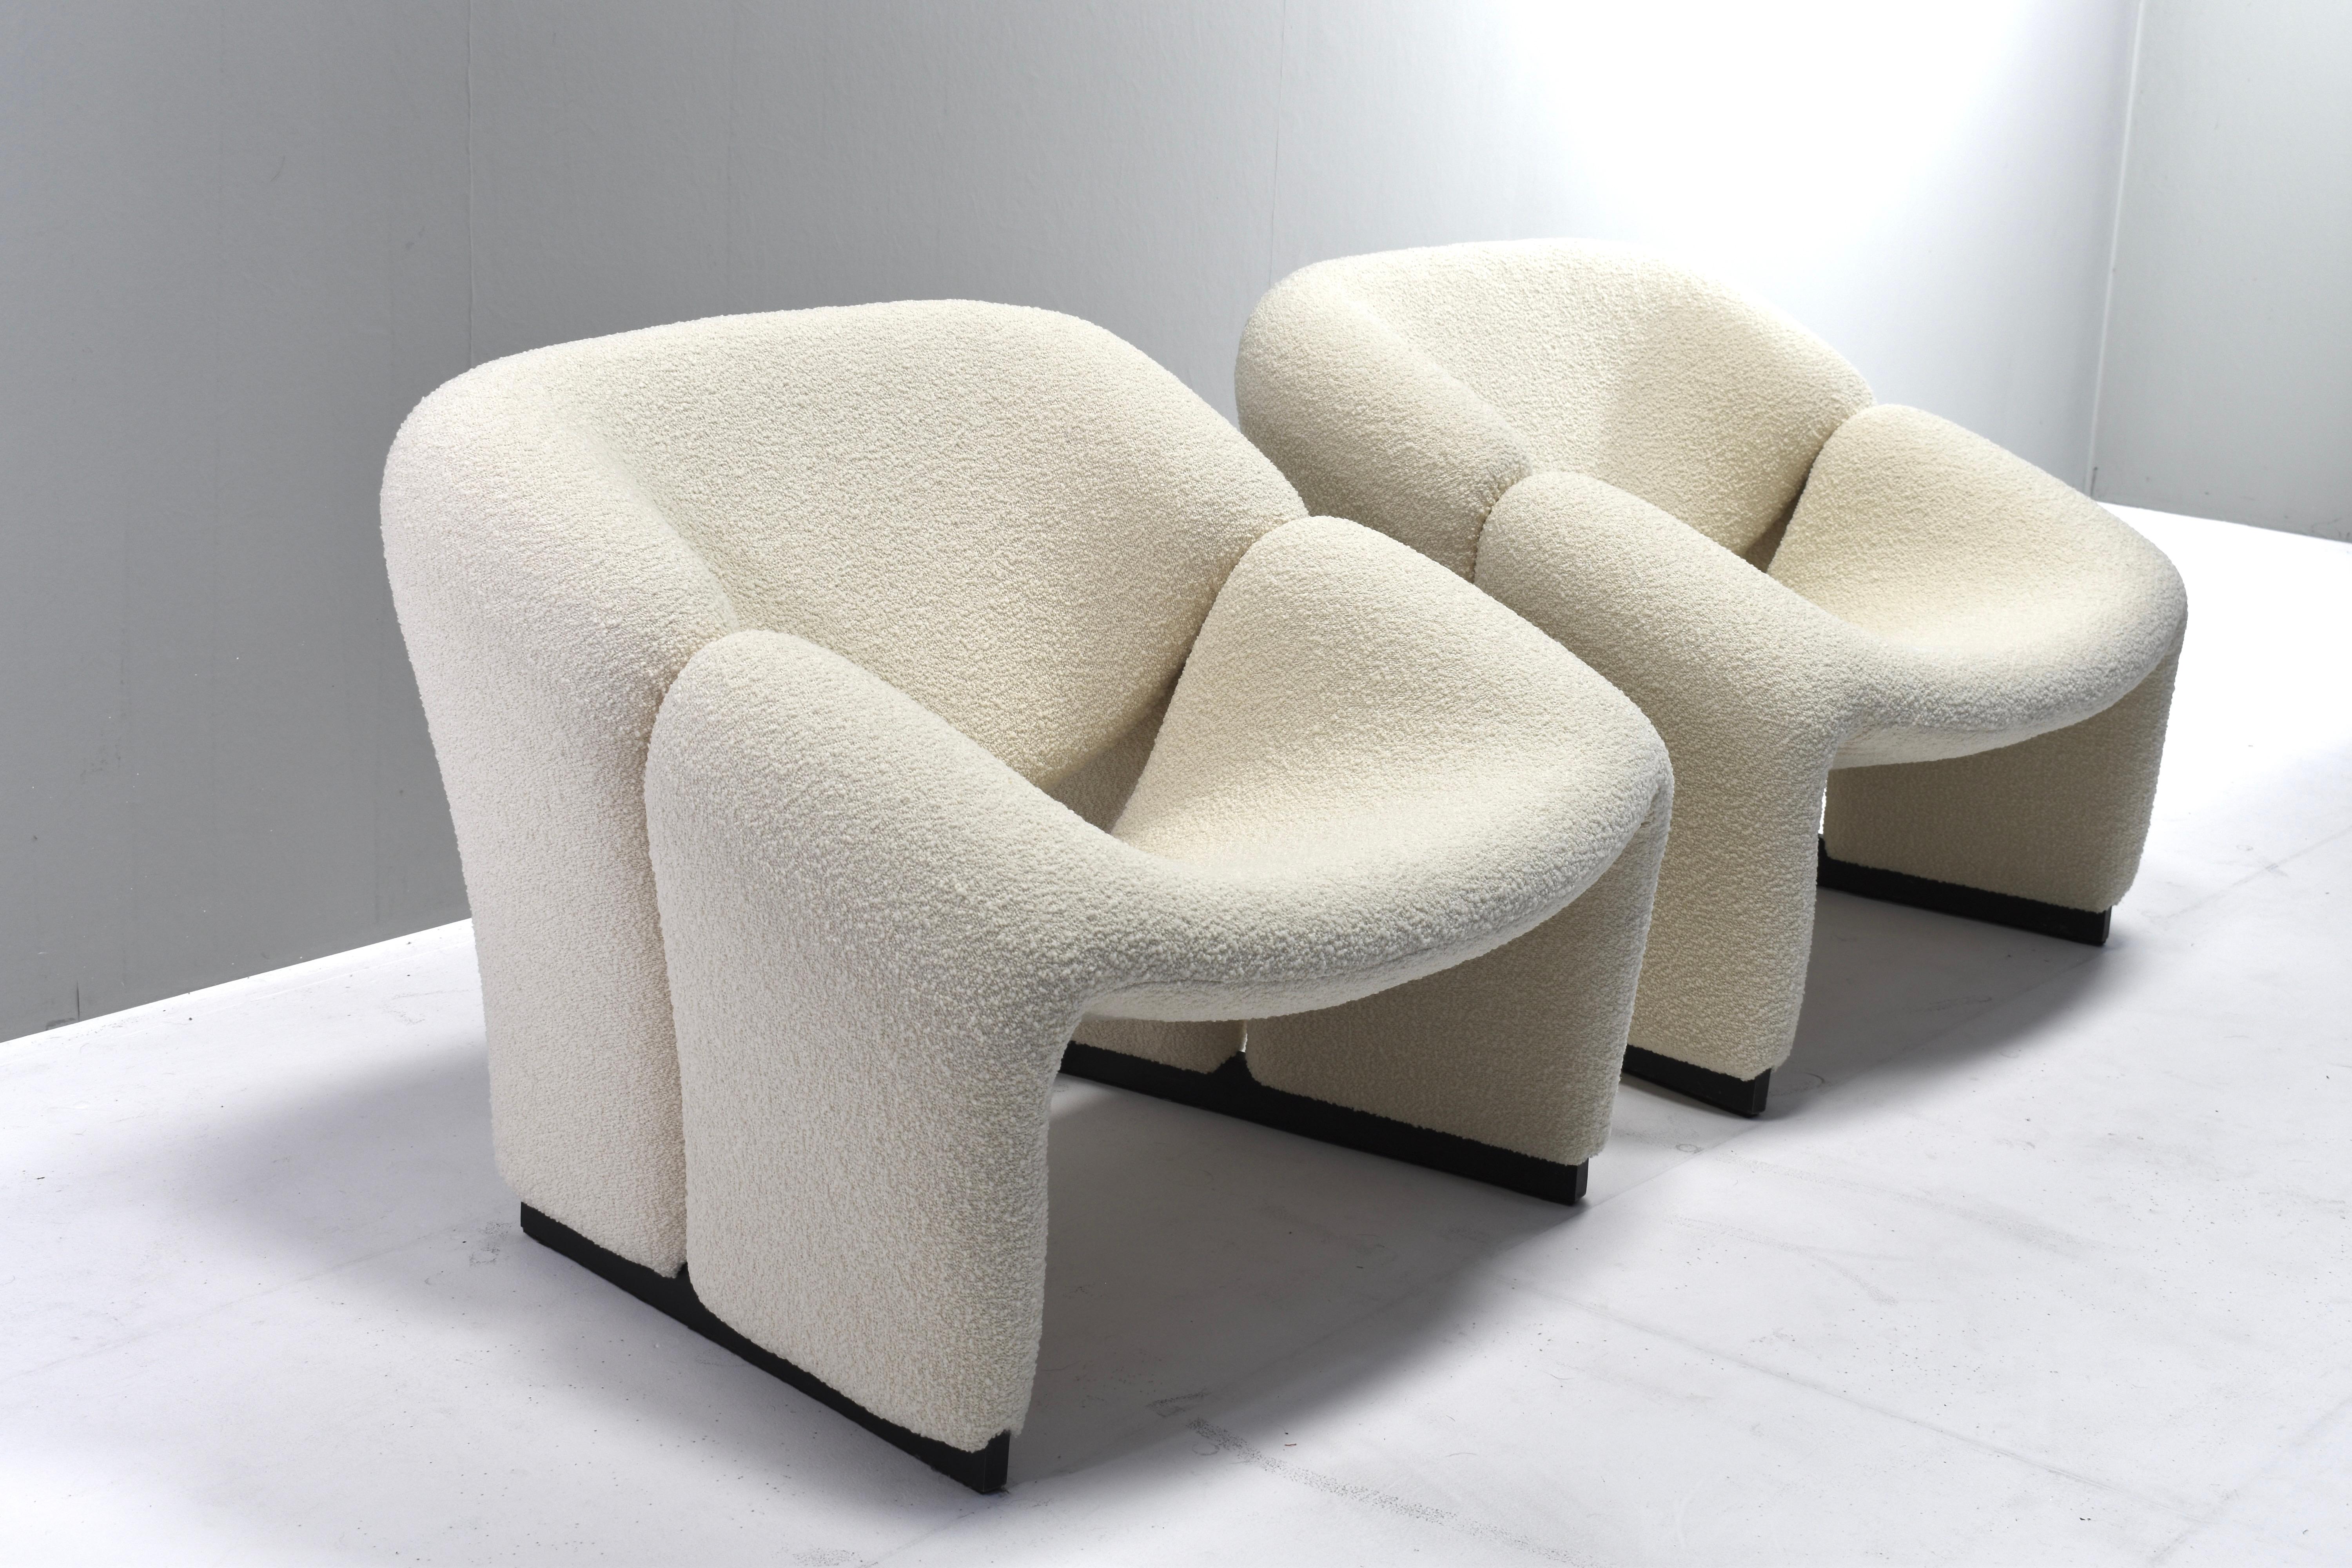 Pair of 1st edition F580 ‘Groovy’ 'M' lounge chairs by Pierre Paulin for Artifort – Netherlands, 1966.
The chairs have been beautifully new upholstered by our craftsman reupholsterer in a beautiful off-white bouclé wool fabric from Paris, France.